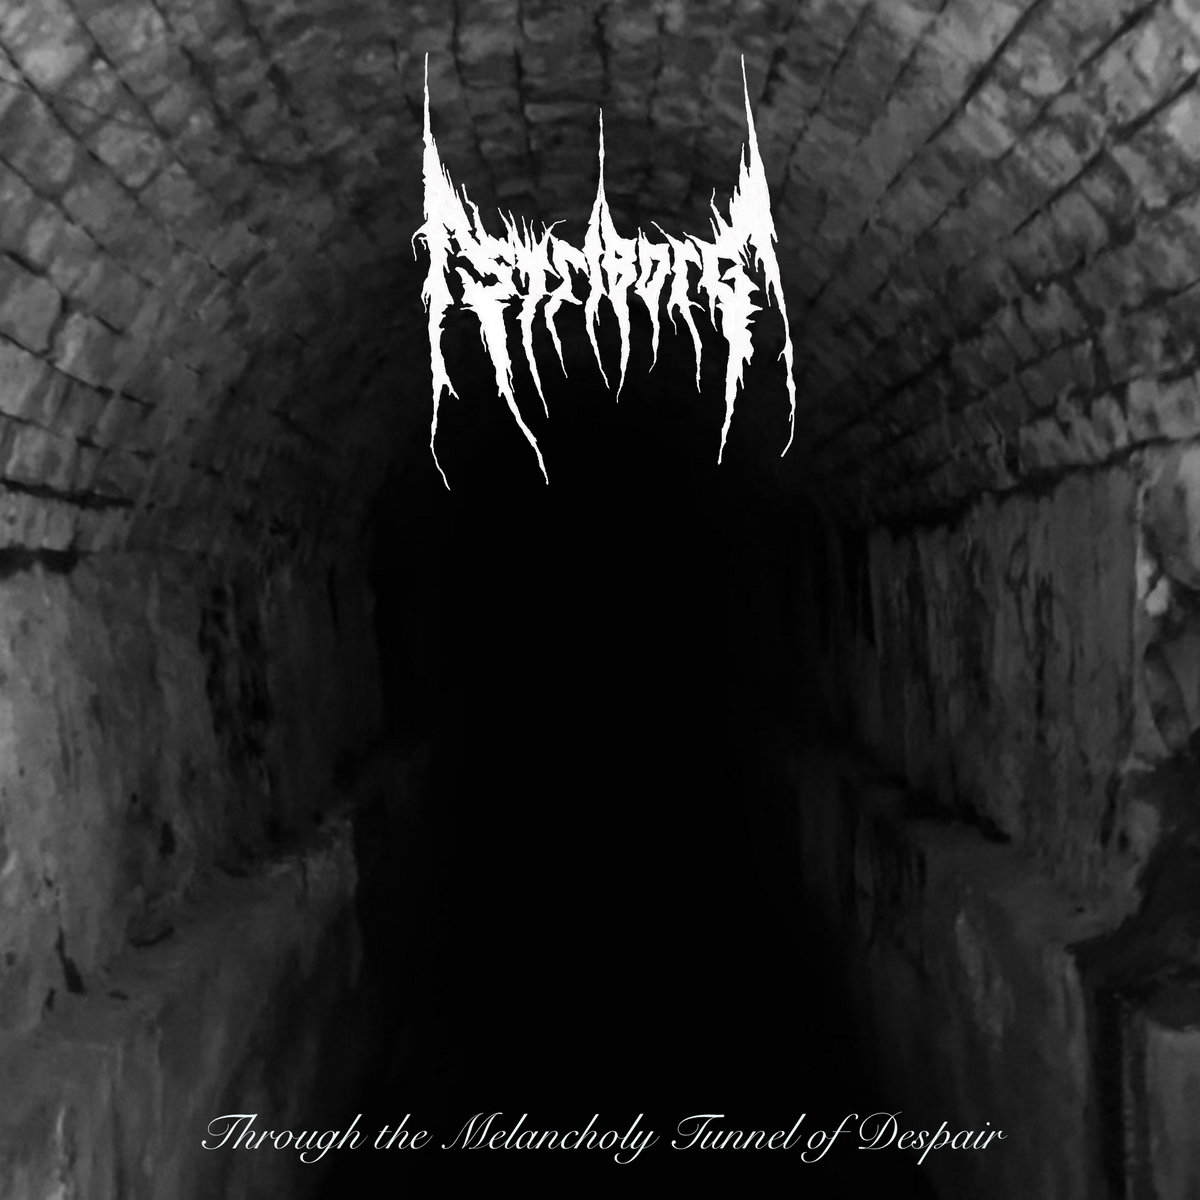 Artwork for the album ‘Through the Melancholy Tunnel of Despair’ by Striborg